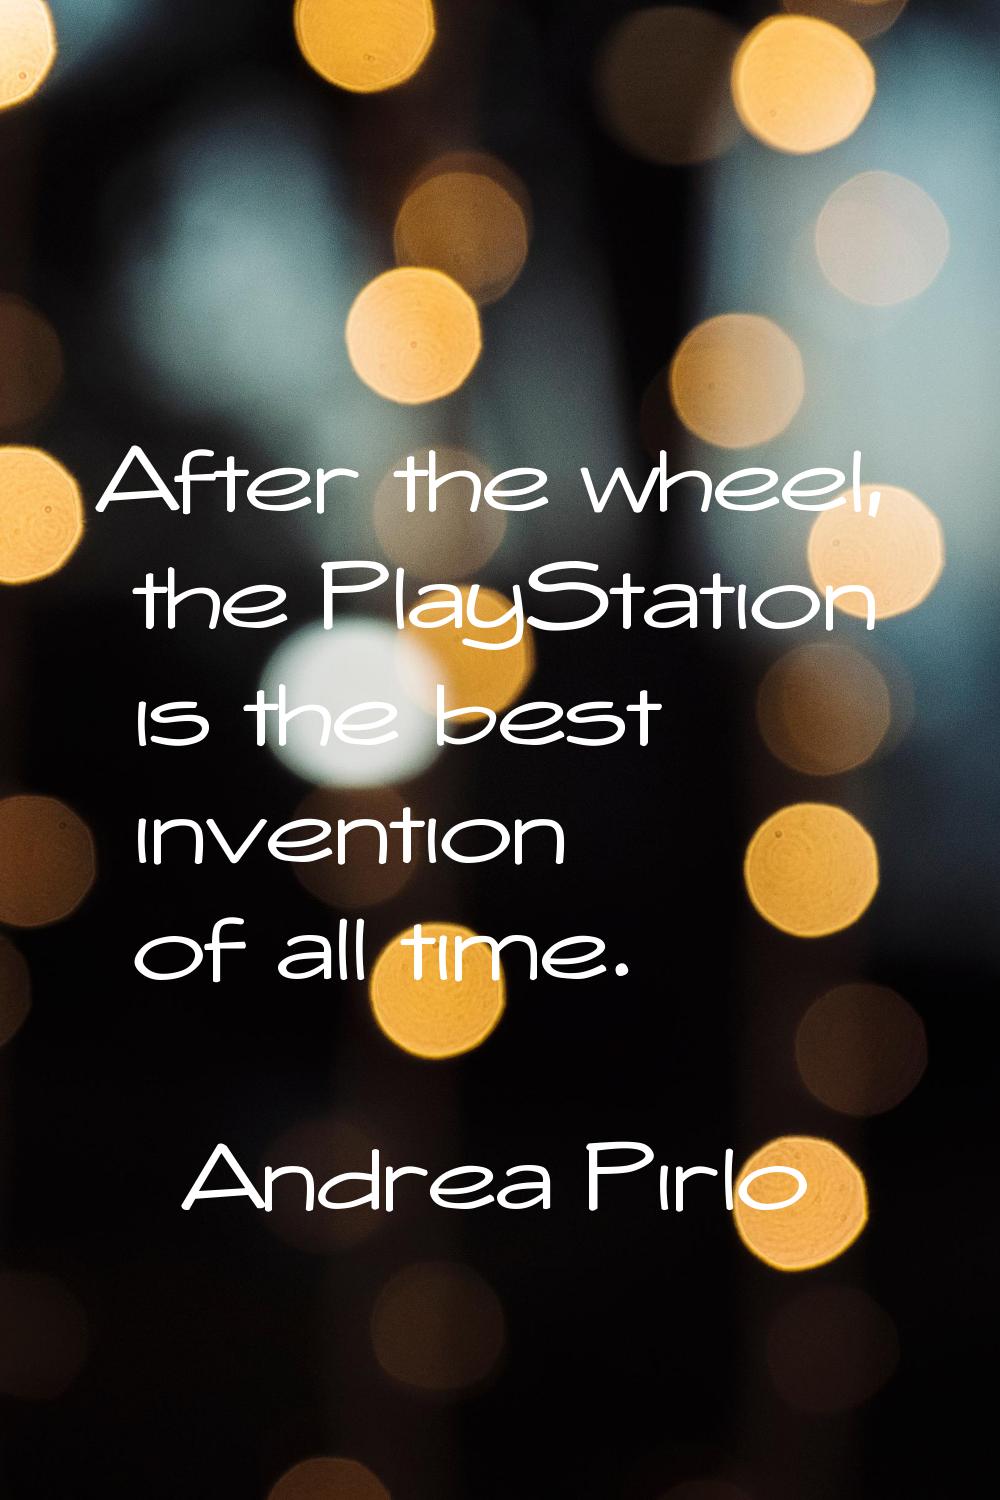 After the wheel, the PlayStation is the best invention of all time.